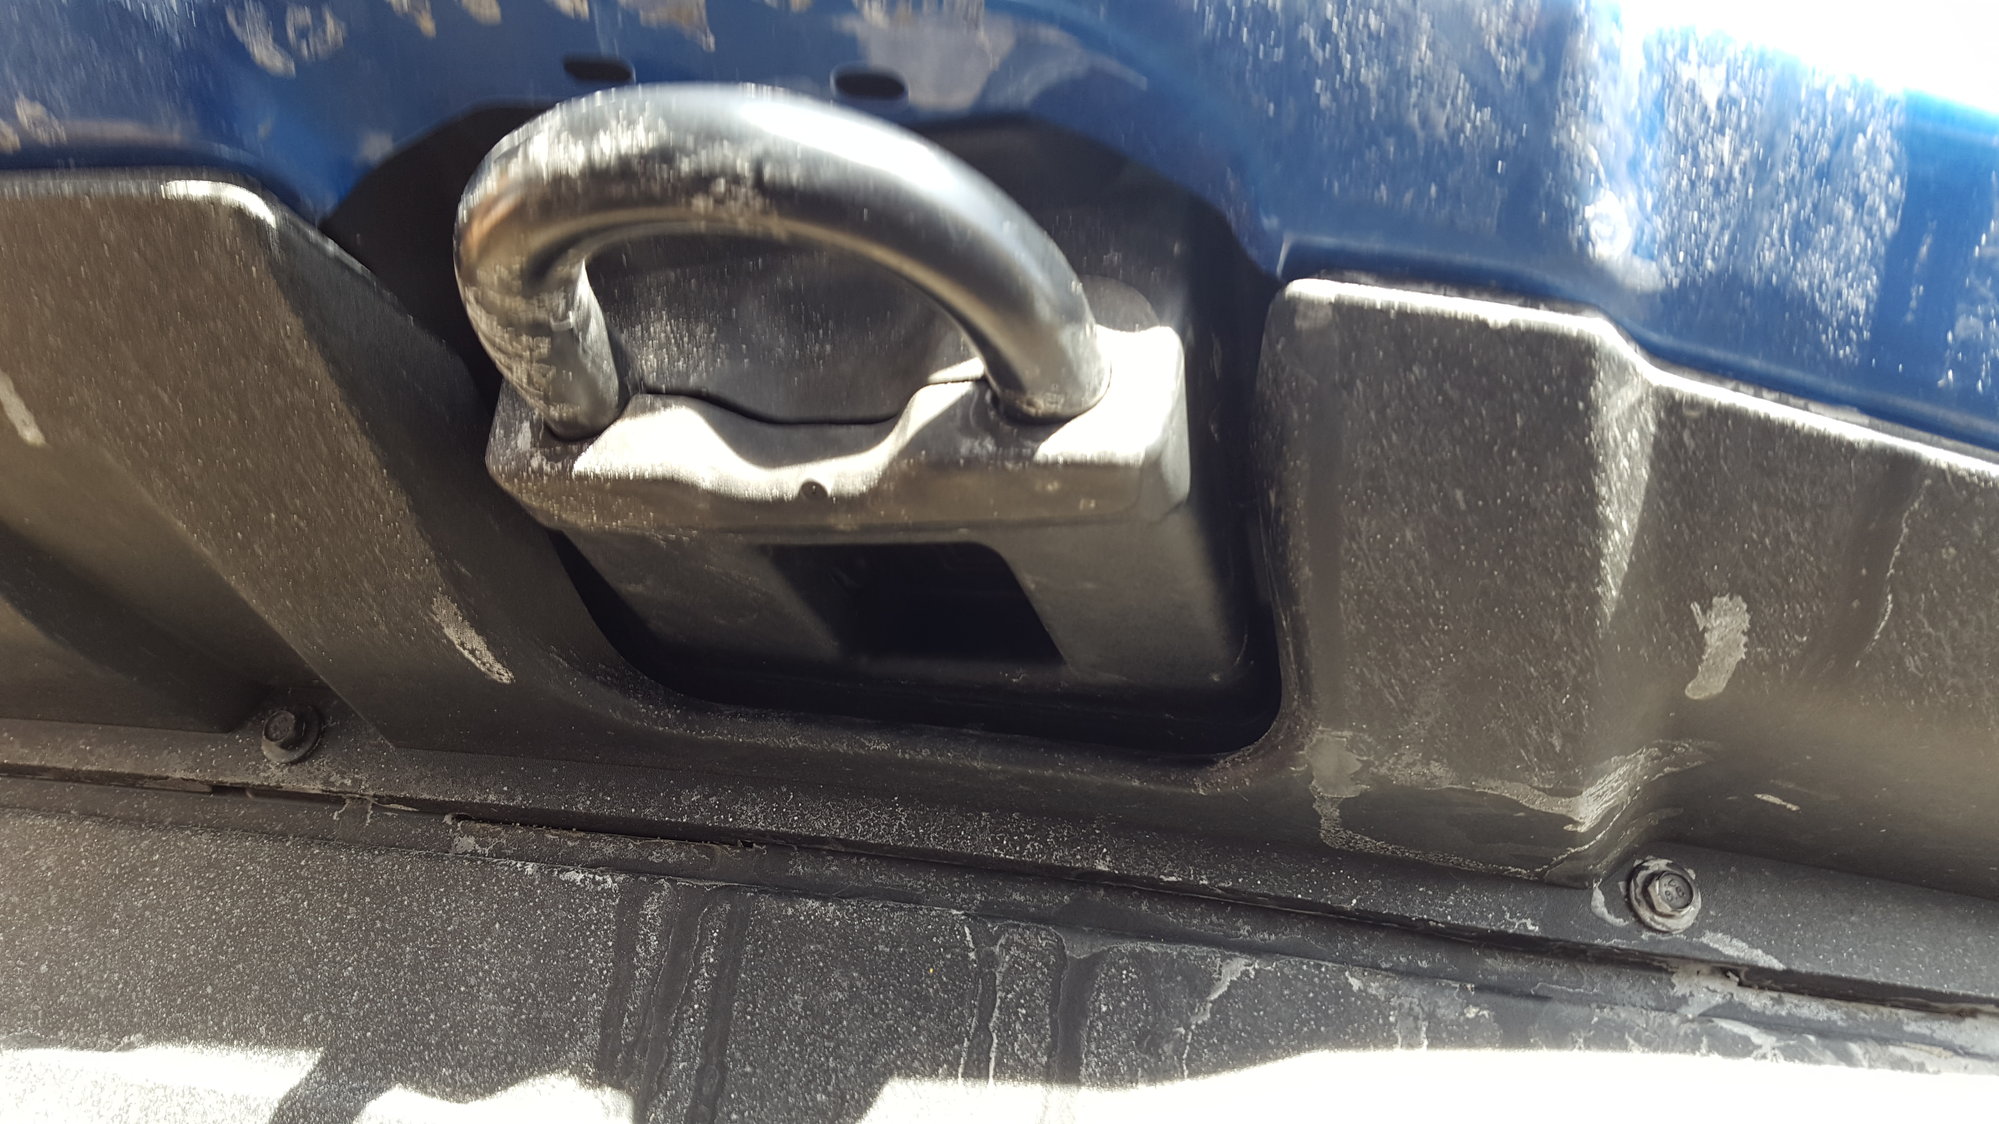 Tow Hook Cover Removal - Ford F150 Forum - Community of Ford Truck